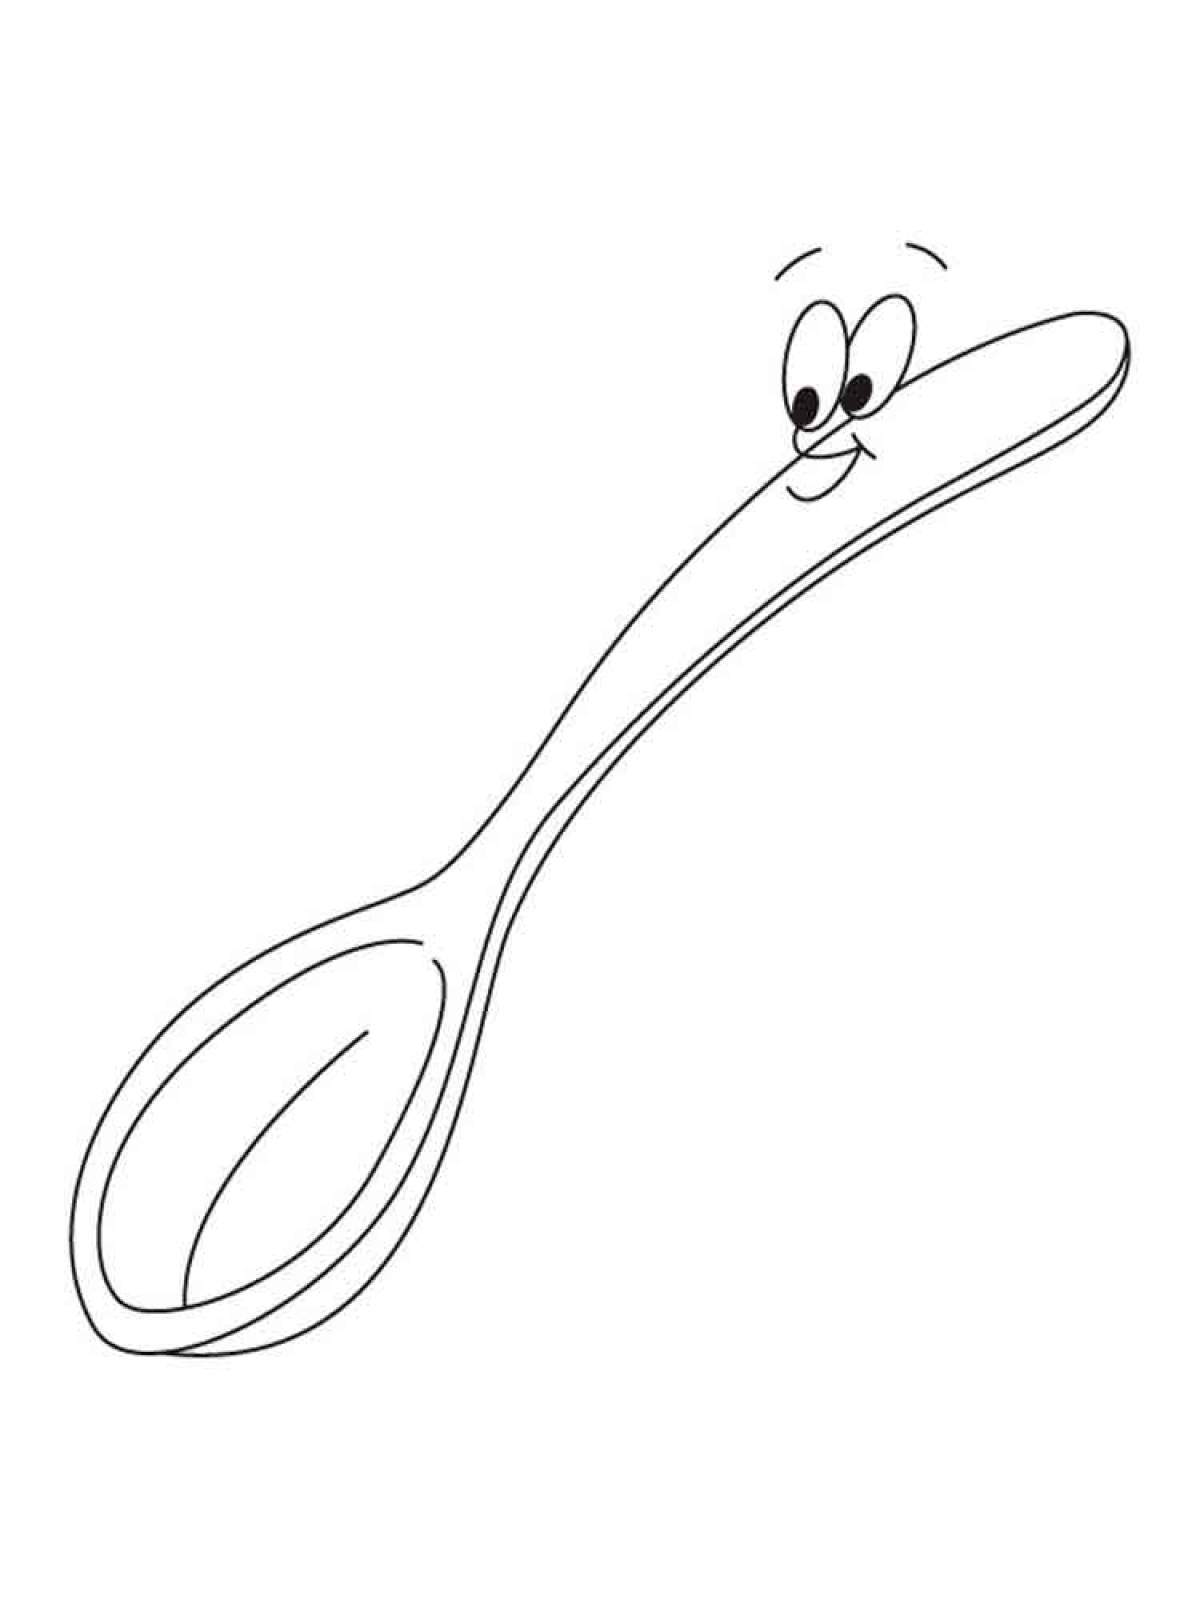 Spoon with eyes